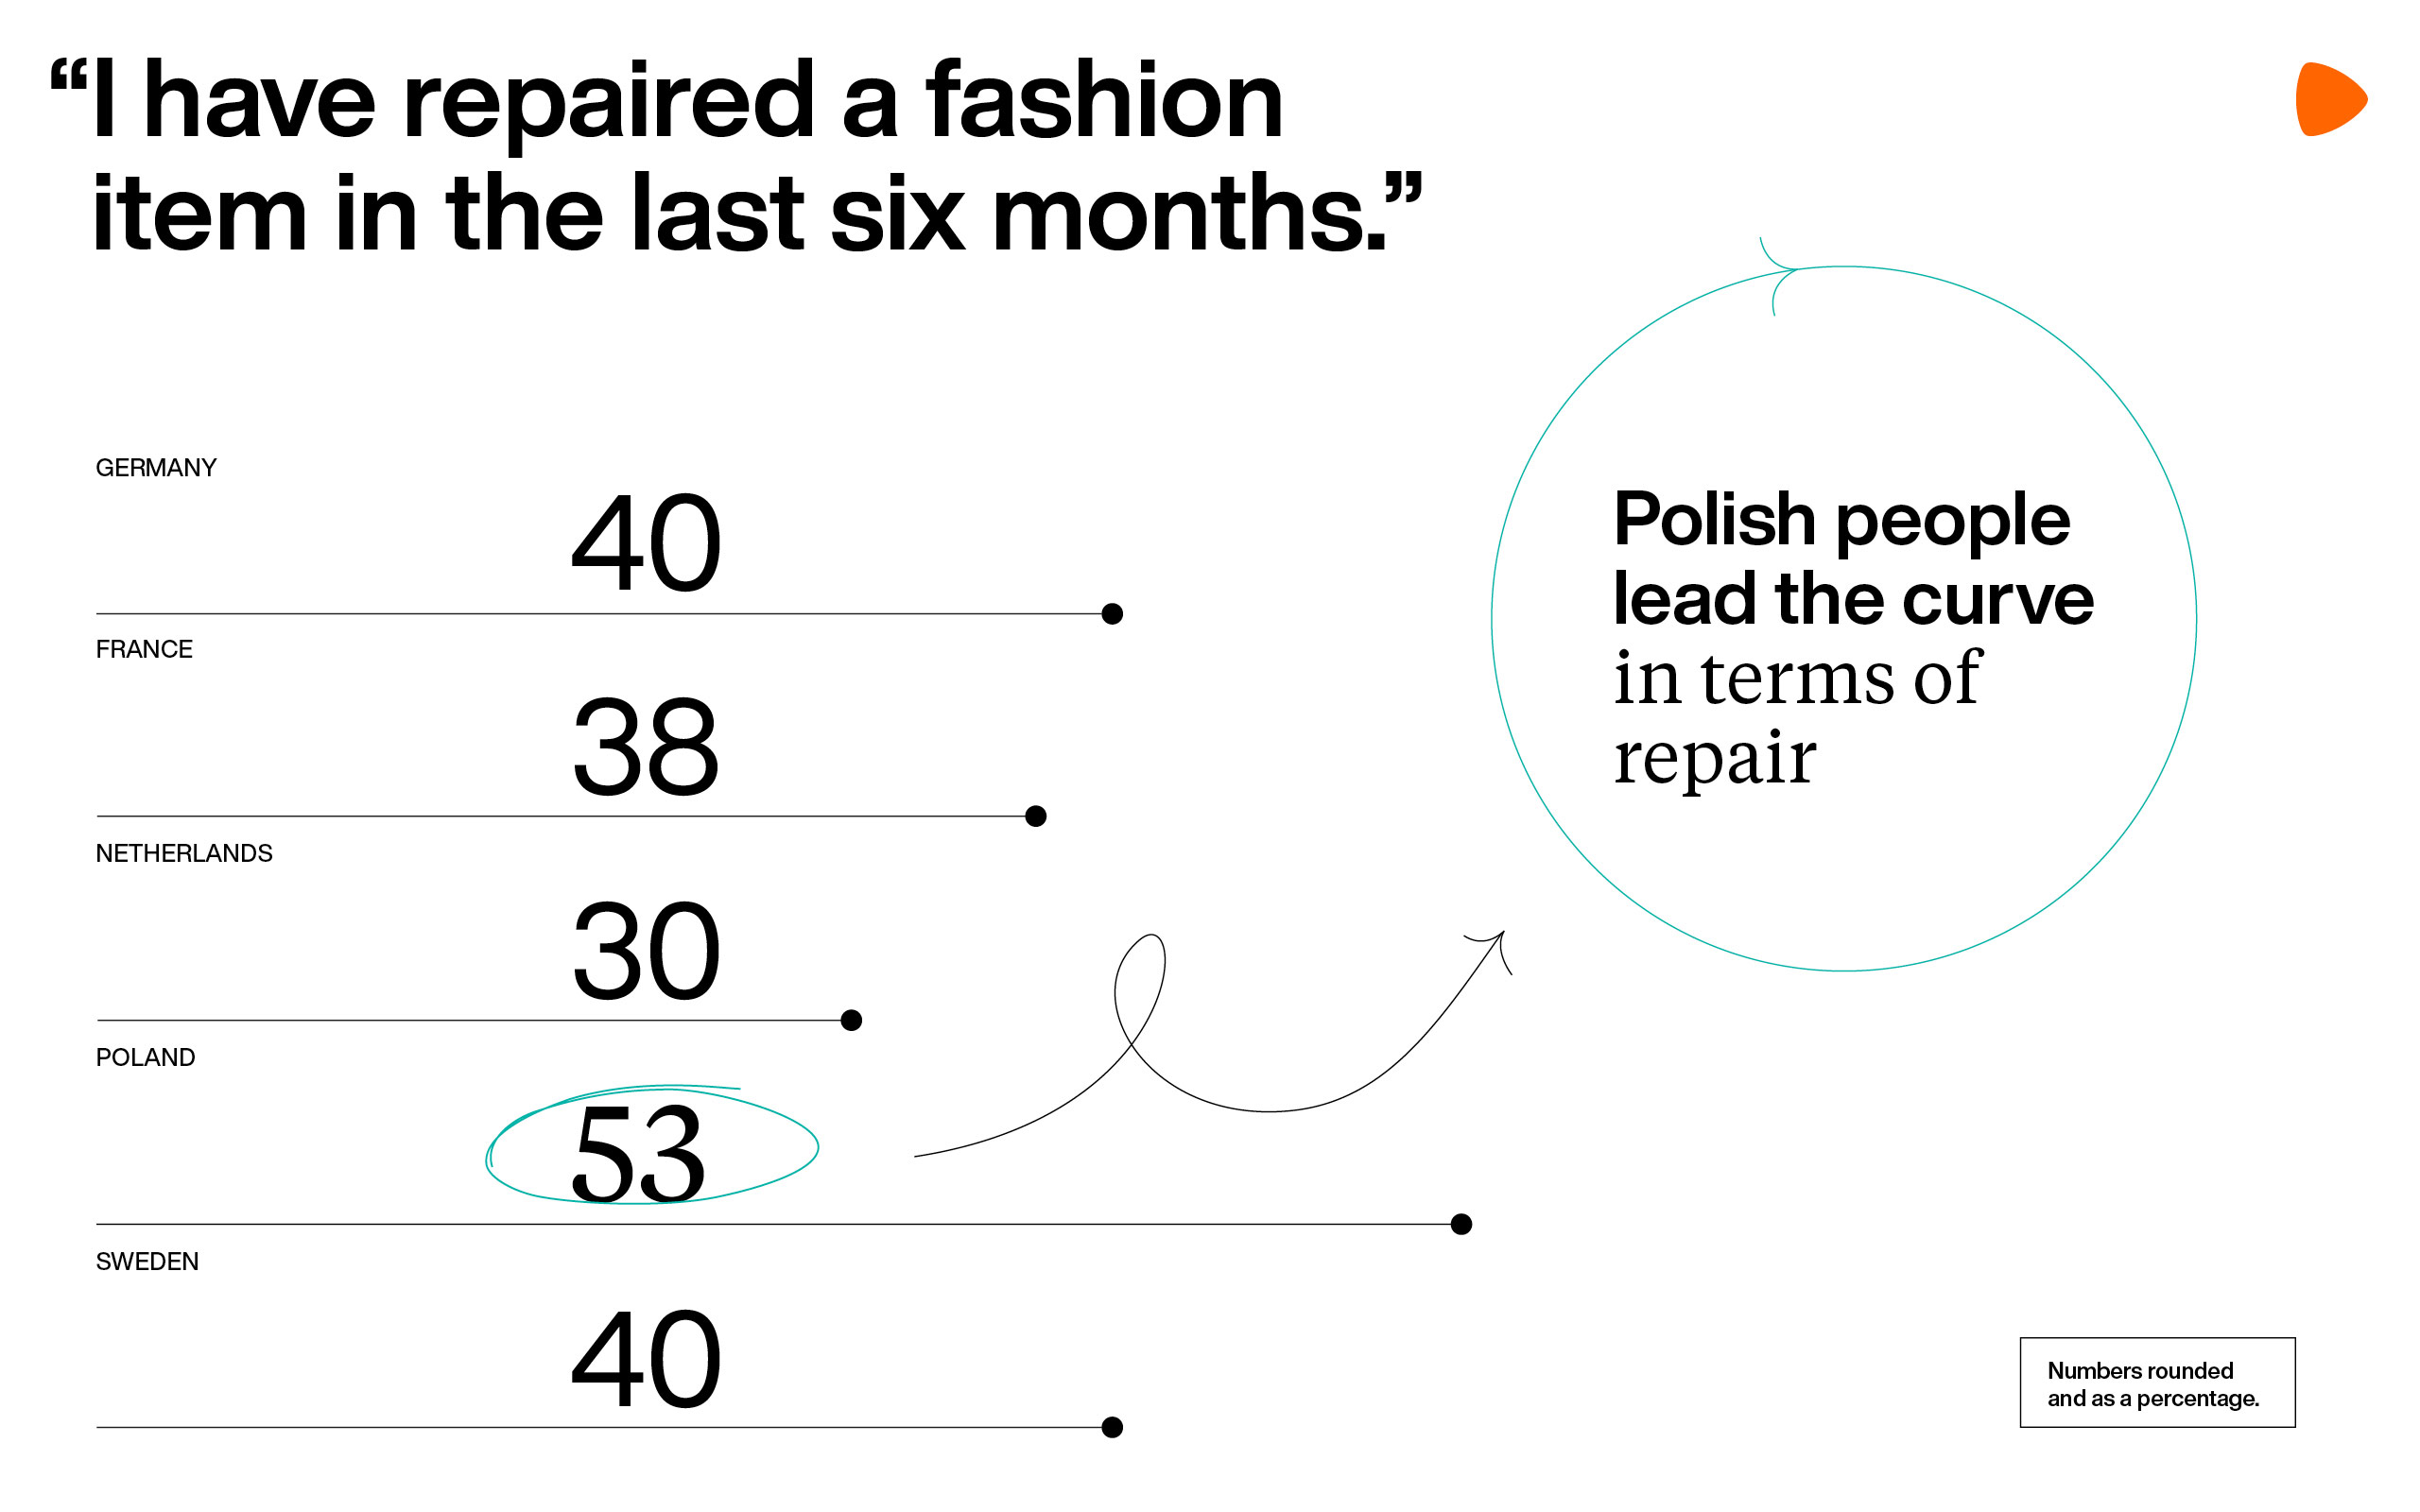 Statement: I have repaired a fashion item in the last six months. Result: Polish people lead the curve in terms of repair (53 %), followed by Germany and Sweden (40% each), France (38%), the Netherlands (30%)